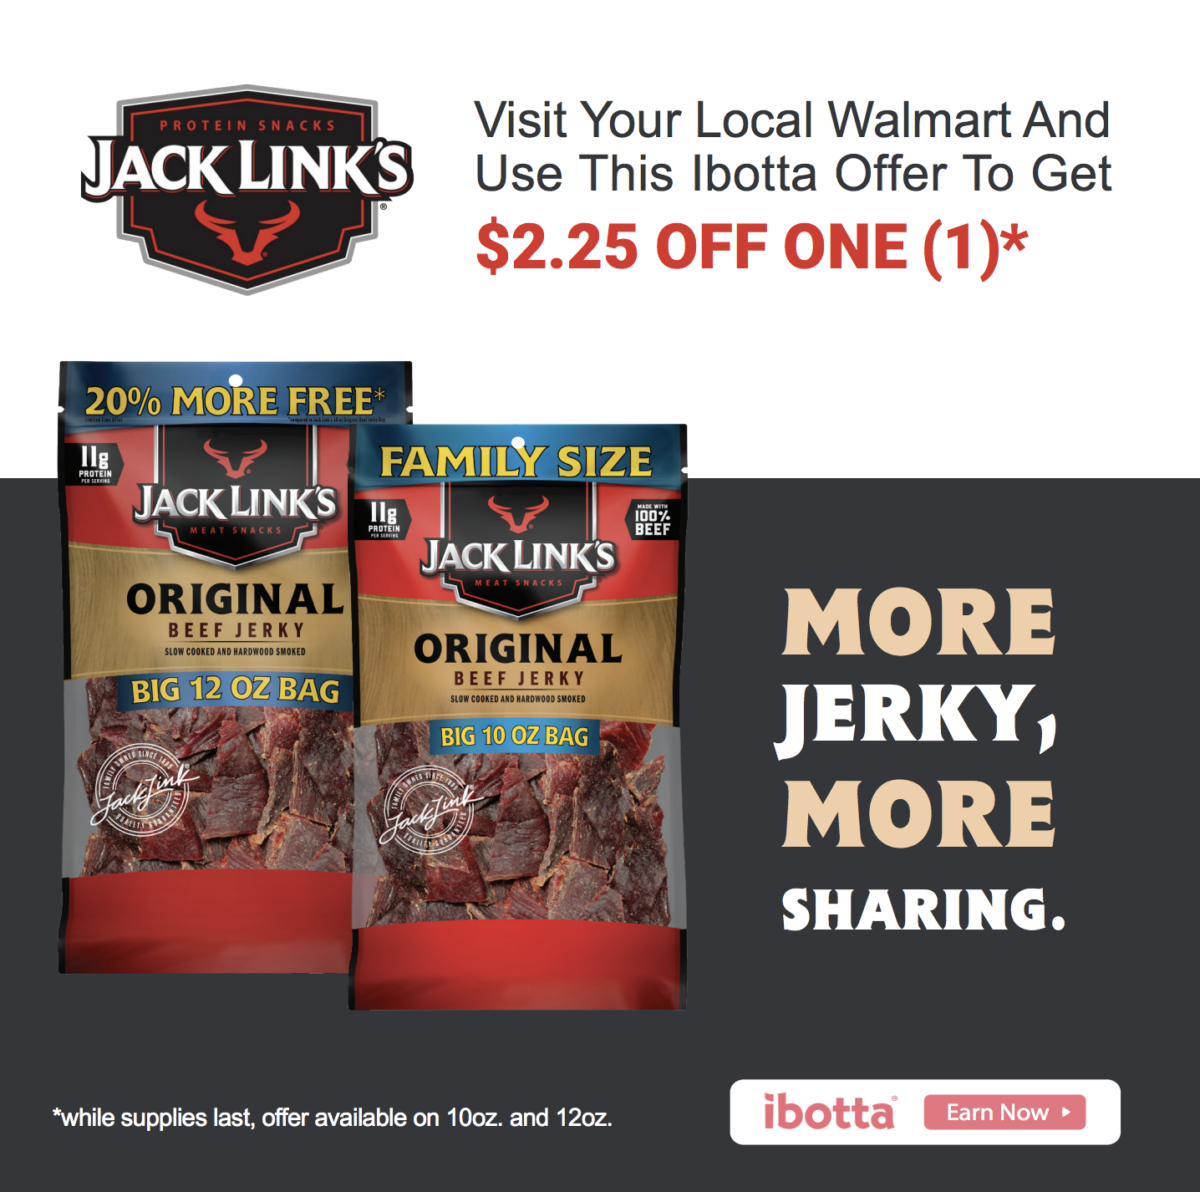 Visit Your Local Walmart & Save On Jack Link’s Beef Jerky!